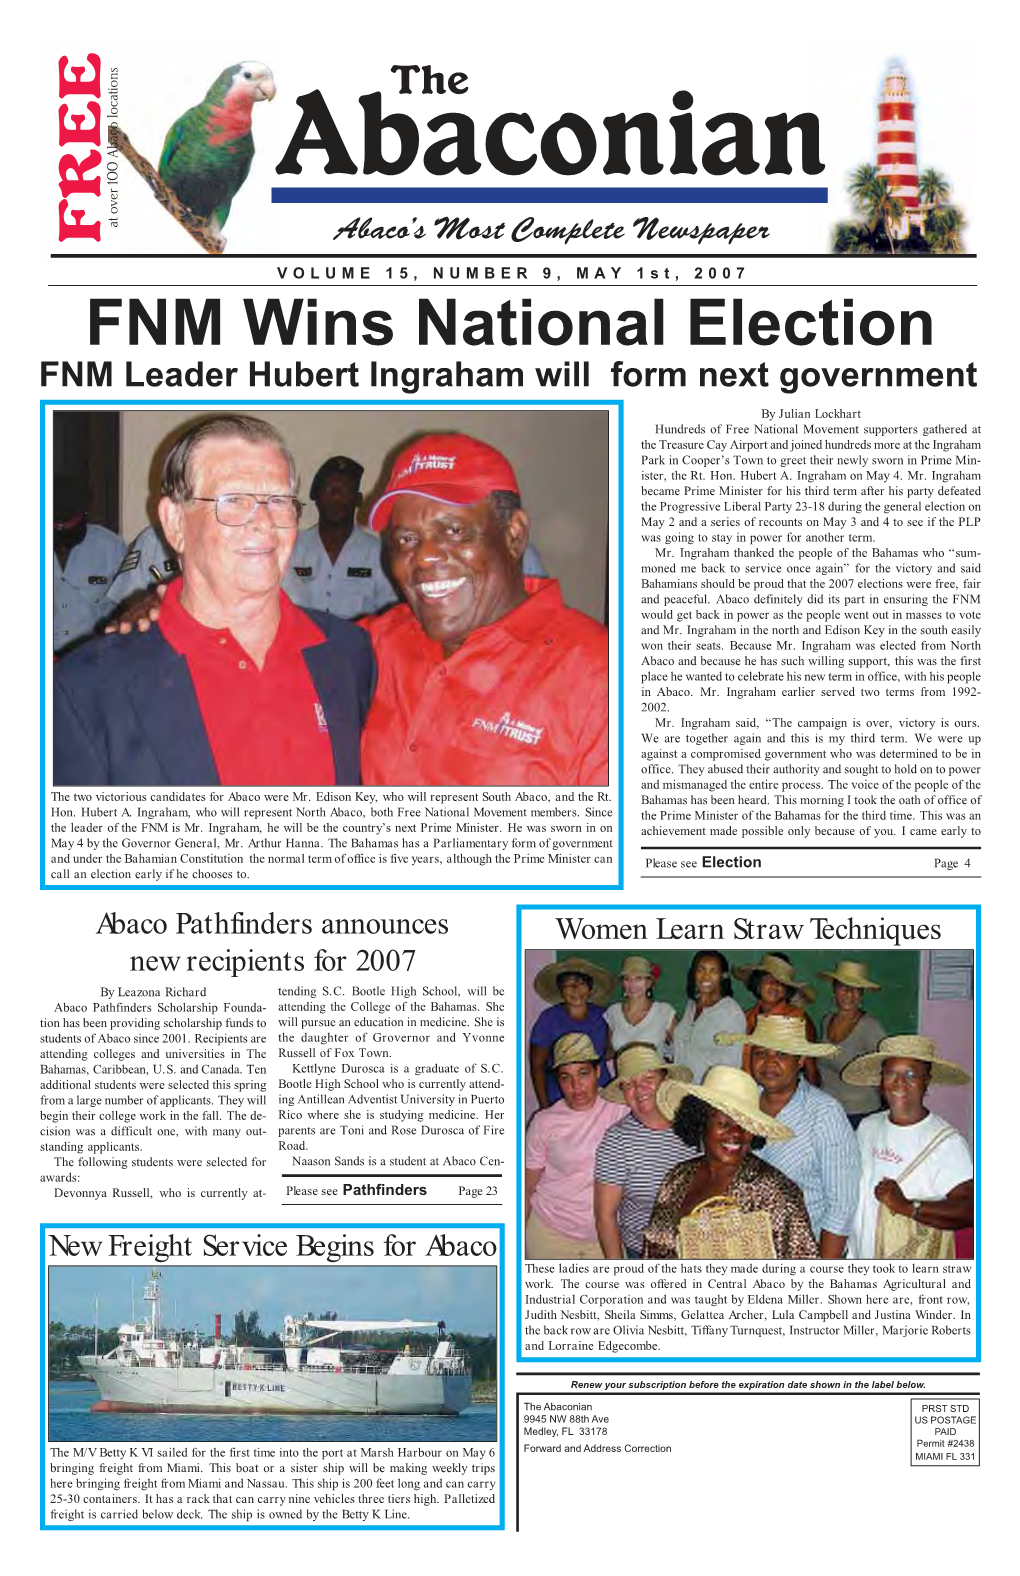 FNM Wins National Election FNM Leader Hubert Ingraham Will Form Next Government